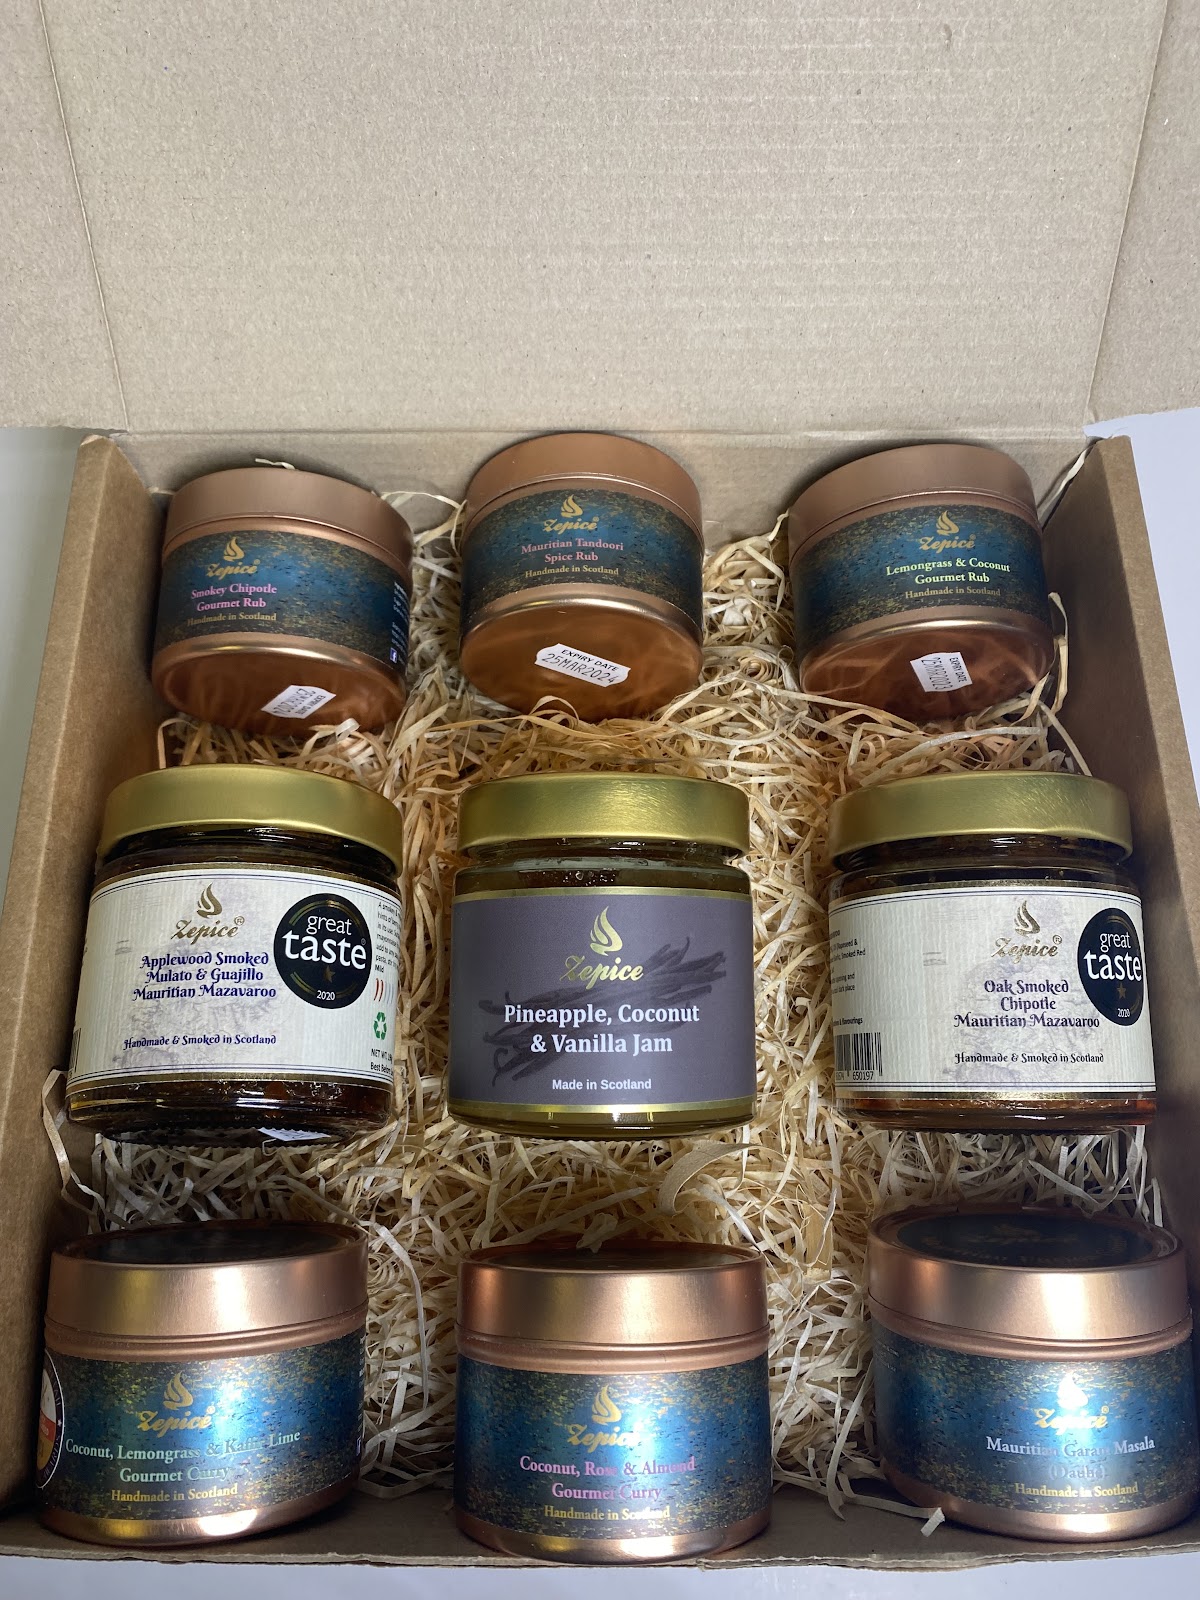 saint andrew's day hamper, these products and spices are produced in scotland